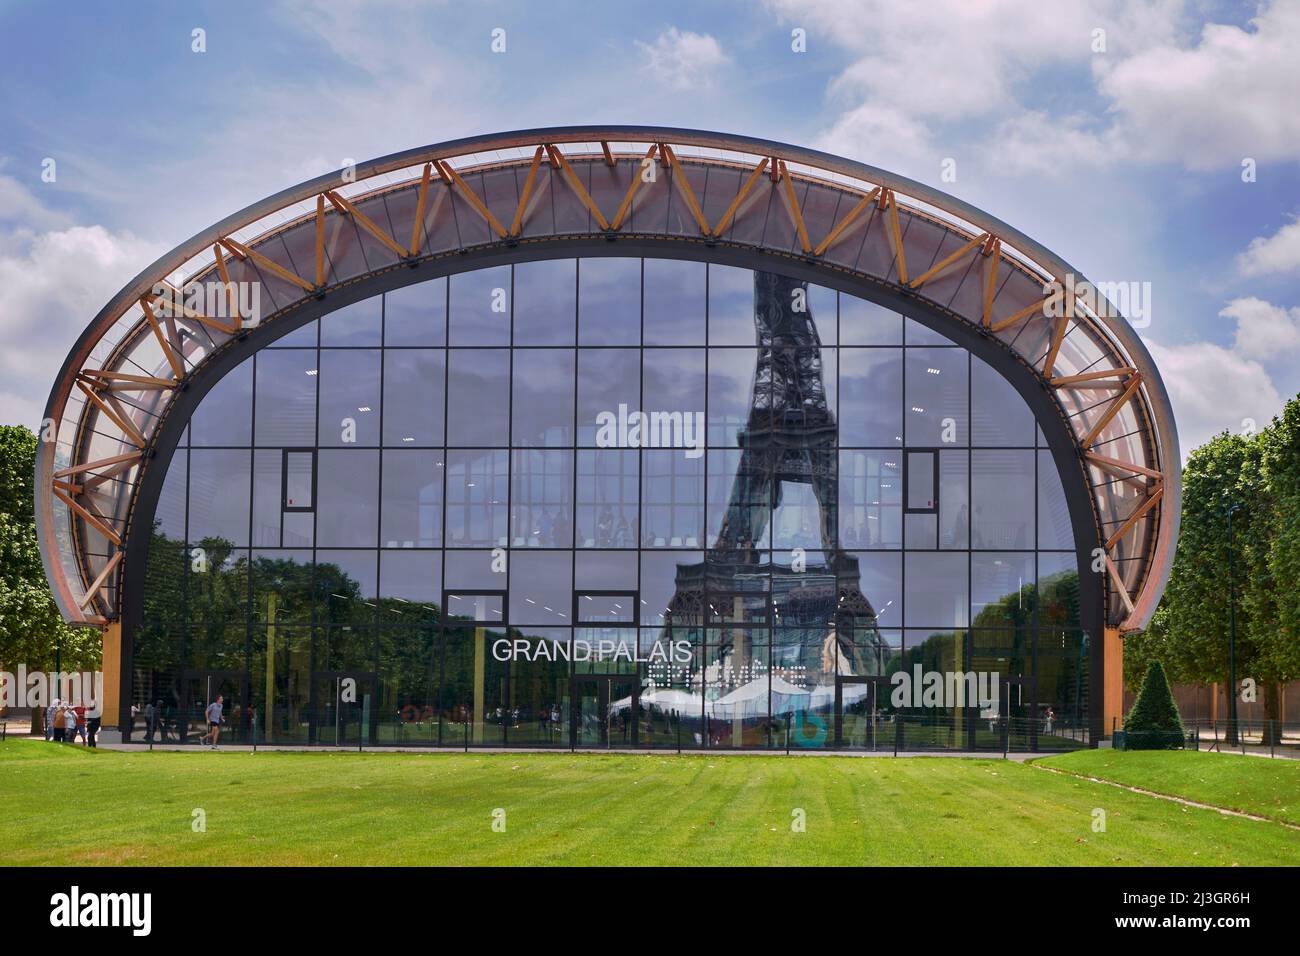 France, Paris, le Grand Palais Ephemere by the Wilmotte cabinet, built during the renovation of the Grand Palais and for the 2024 Olympic Games Stock Photo